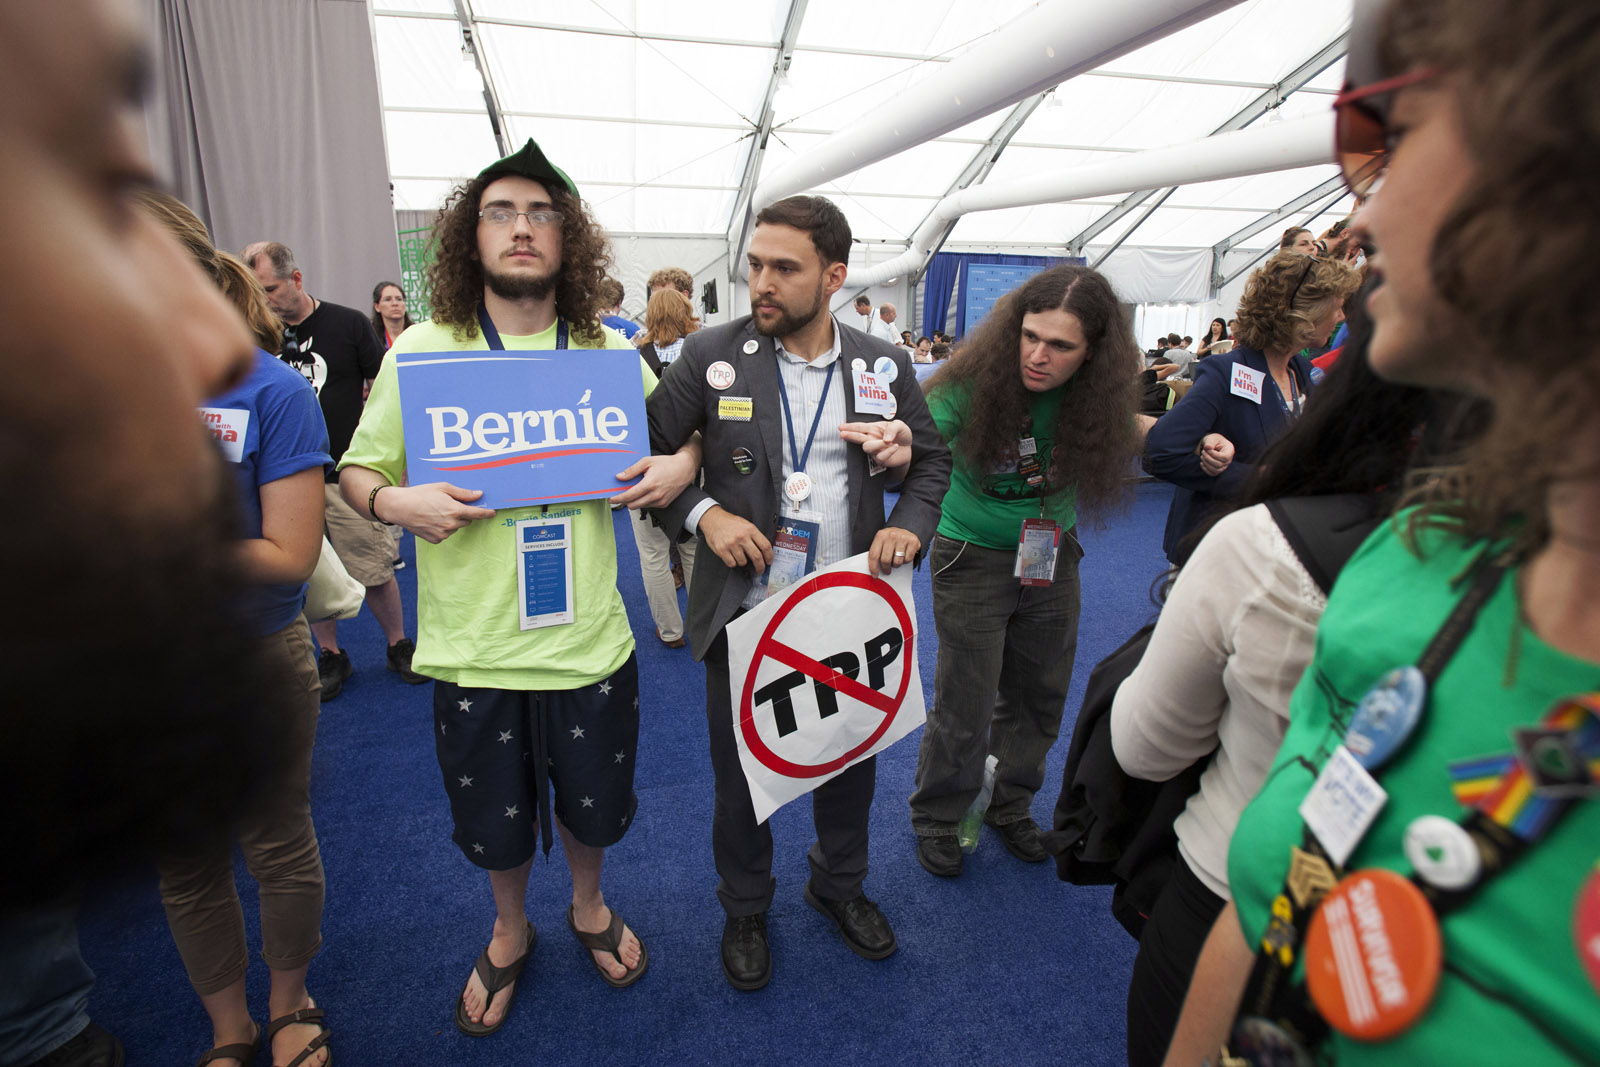 Supporters of Bernie Sanders delegate Nina Turner lock arms during protest inside the media tent on Wednesday, July 27, 2016, the third day of the Democratic National Convention in Philadelphia. They say she's being punished by the party for her support of Sanders. (AP Photo/Michael R. Sisak)